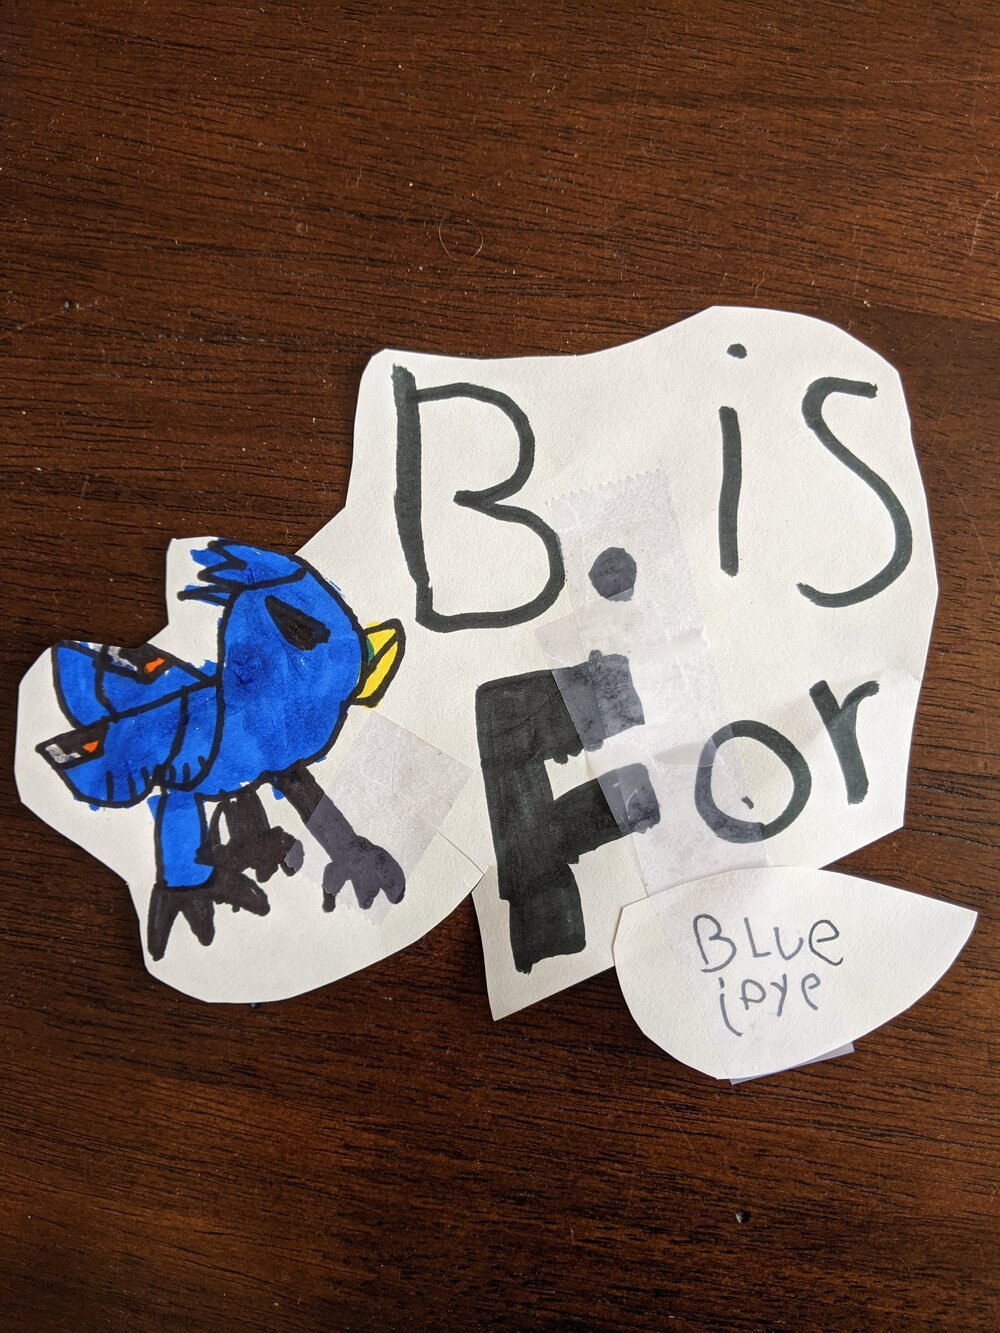 B is for Bluejay, by Julian